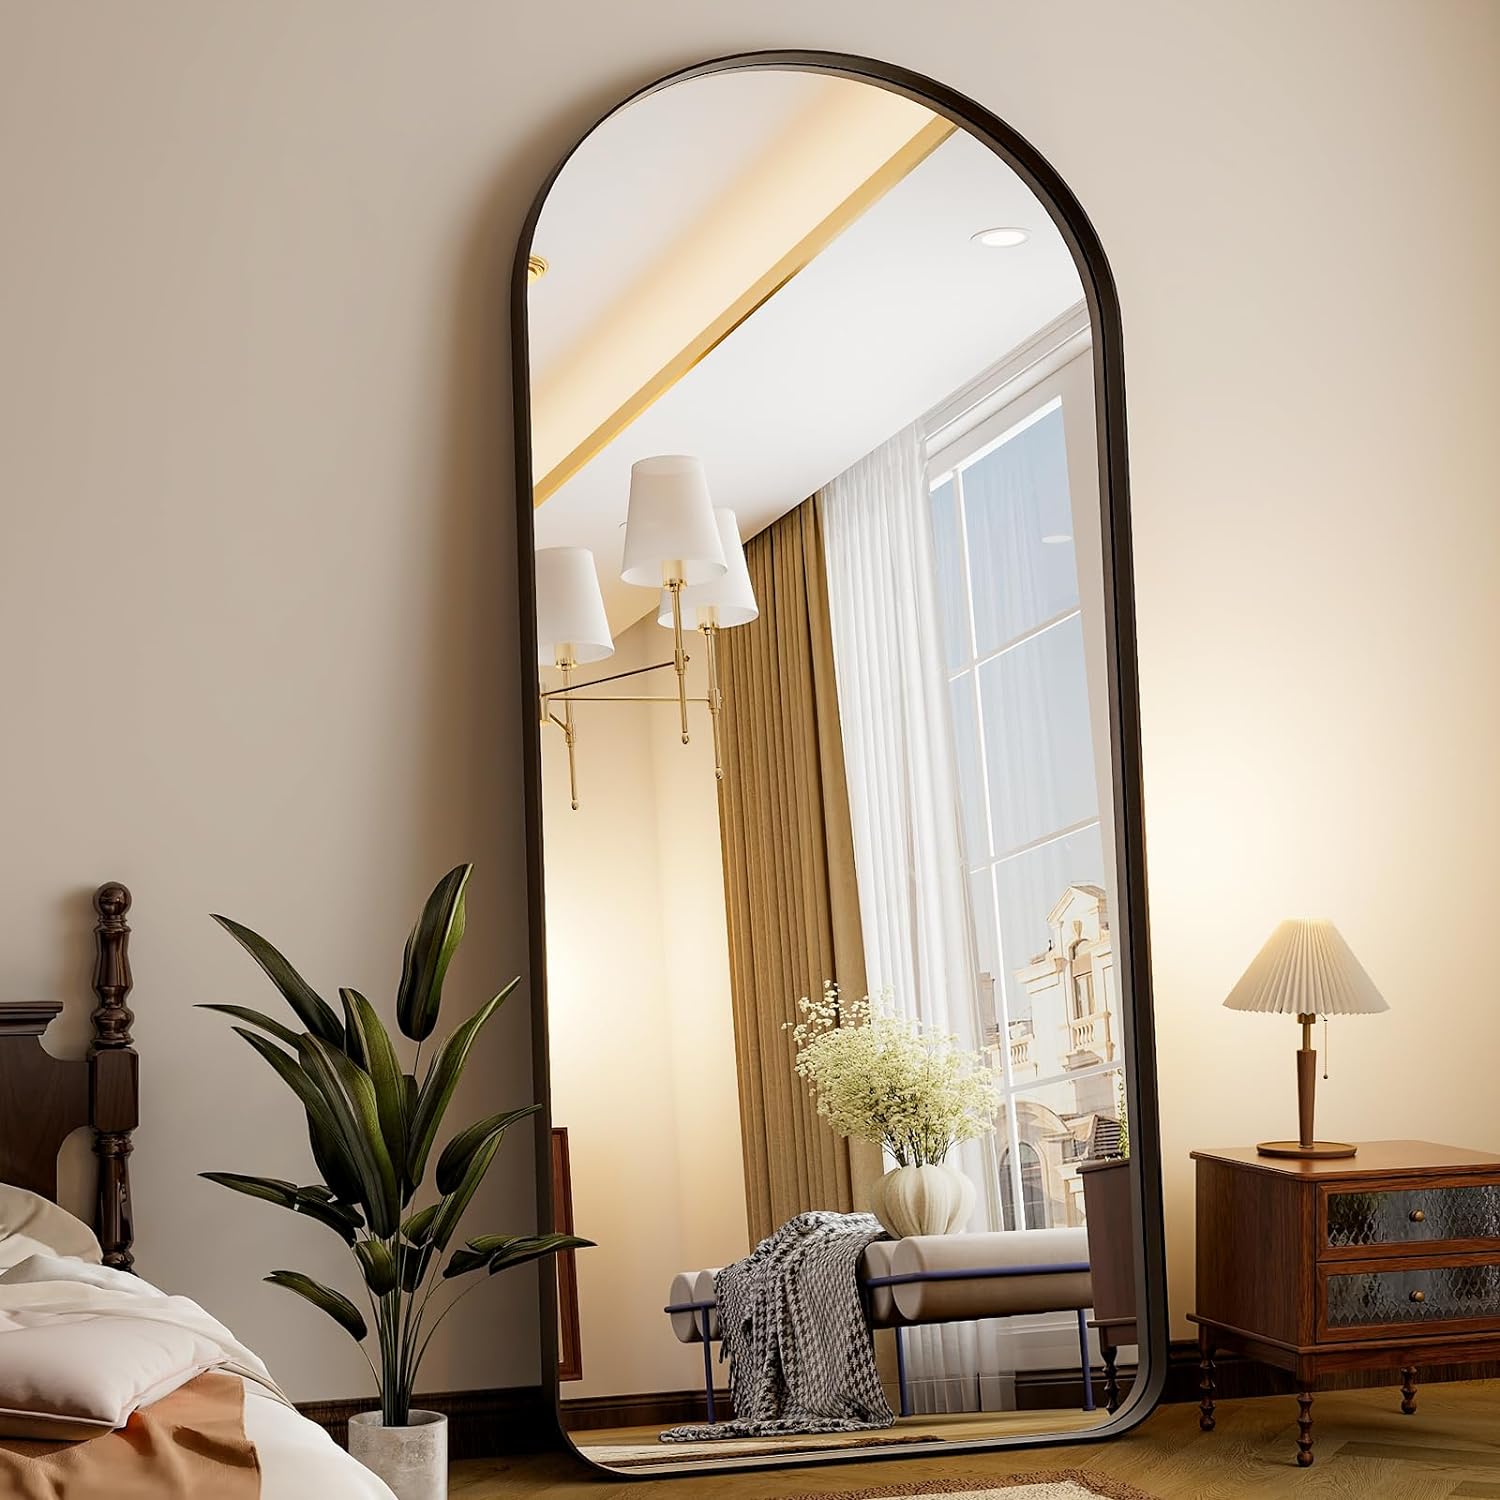 I wanted something clean lined, quality built and inexpensive. This is it! Perfect for my bathroom full length mirror. The reflection is also clear (you know how some mirrors are wonky!) this one isnt! Perfect oversized full length mirror (bought the 70x30